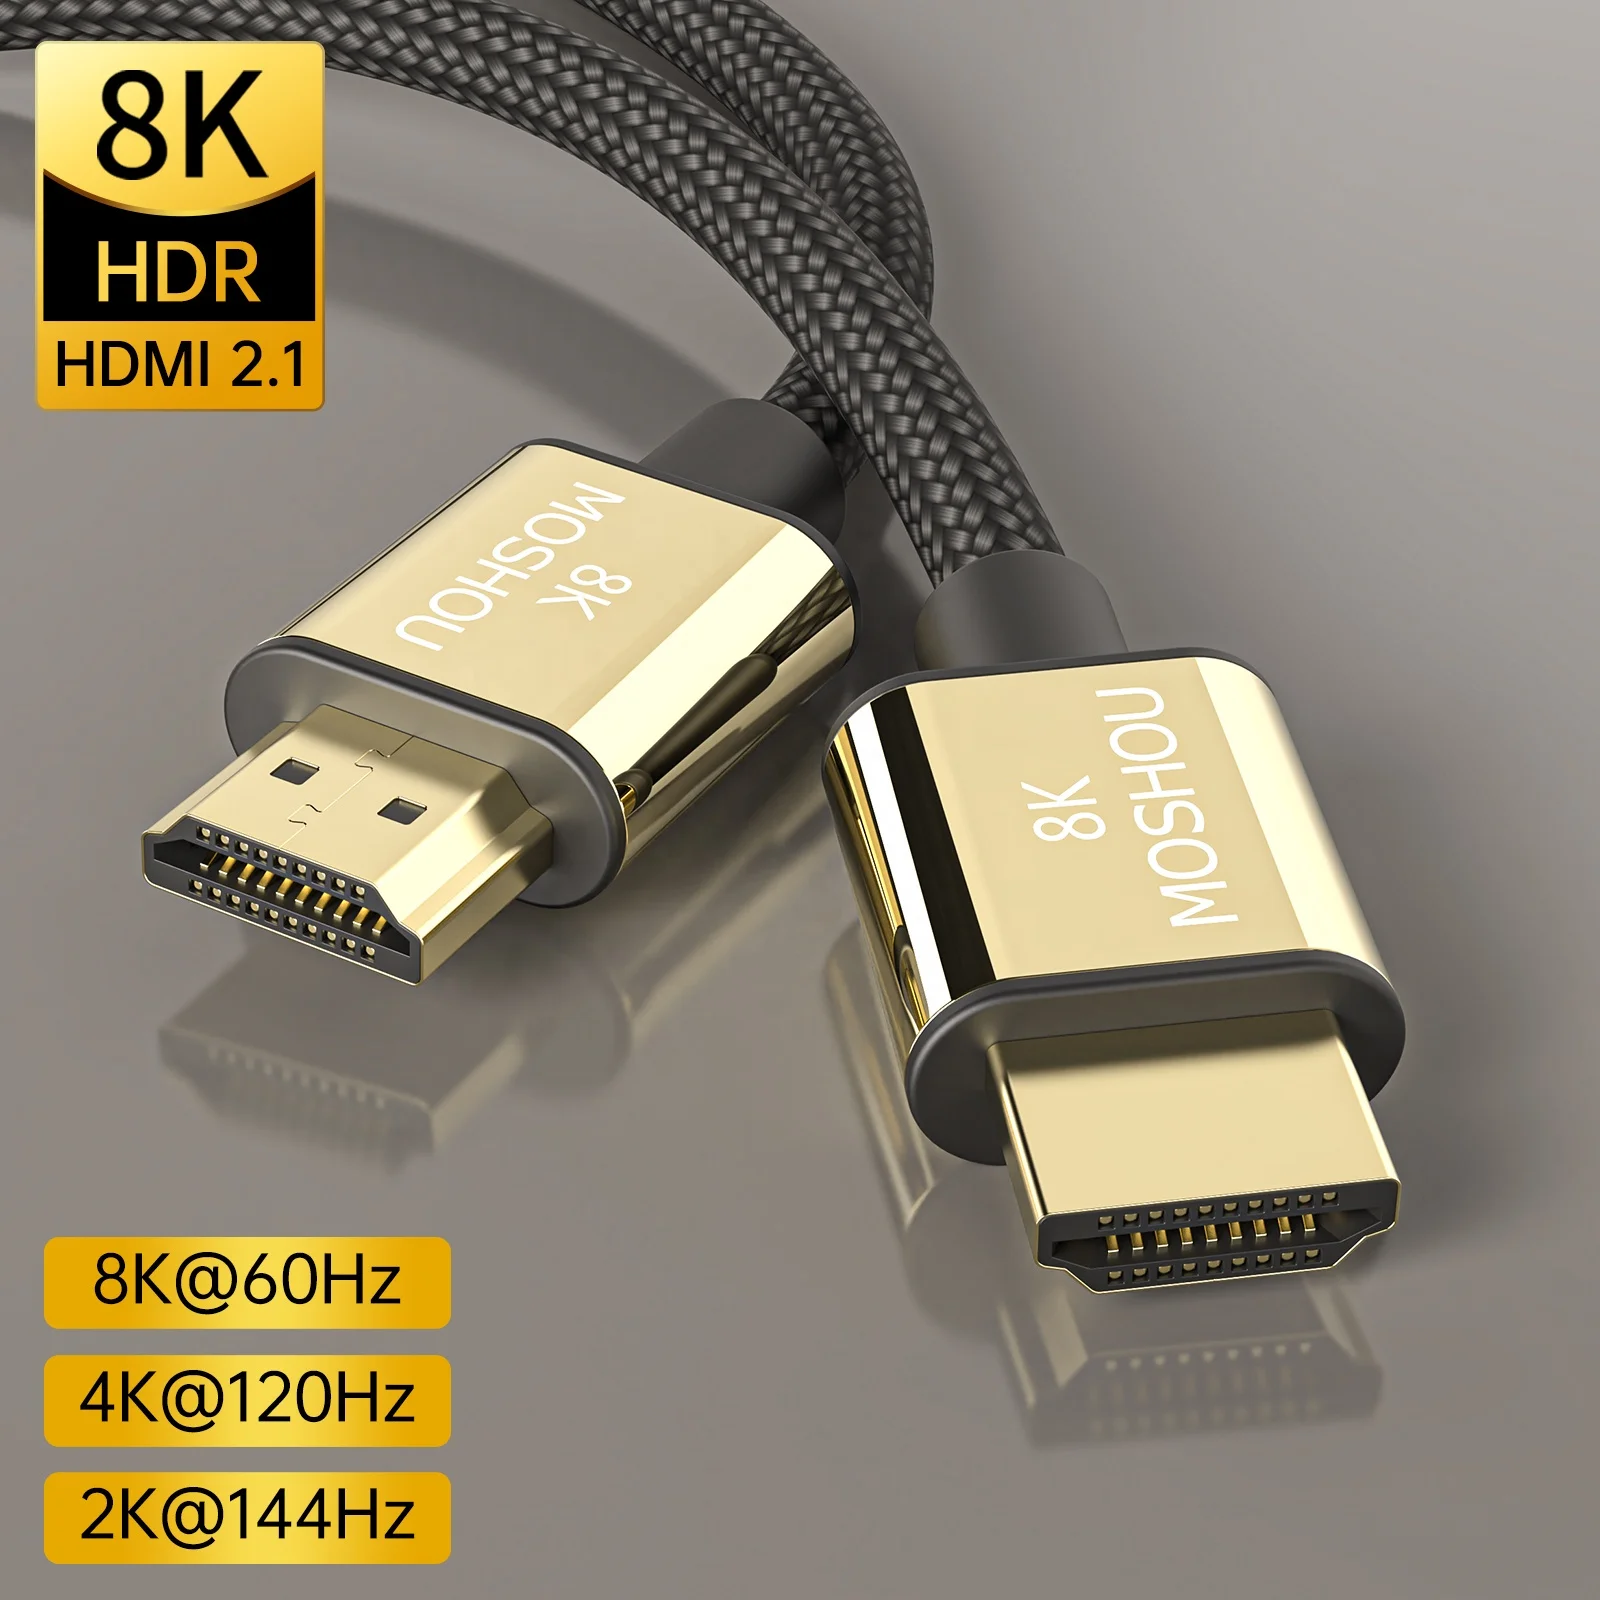 

Certified Ultra High Speed HDMI 2.1 Cable Braided Cord 48Gbps 4K@120Hz 8K@60Hz Dynamic HDR UHD Adapter For HDTV Monitor Gaming